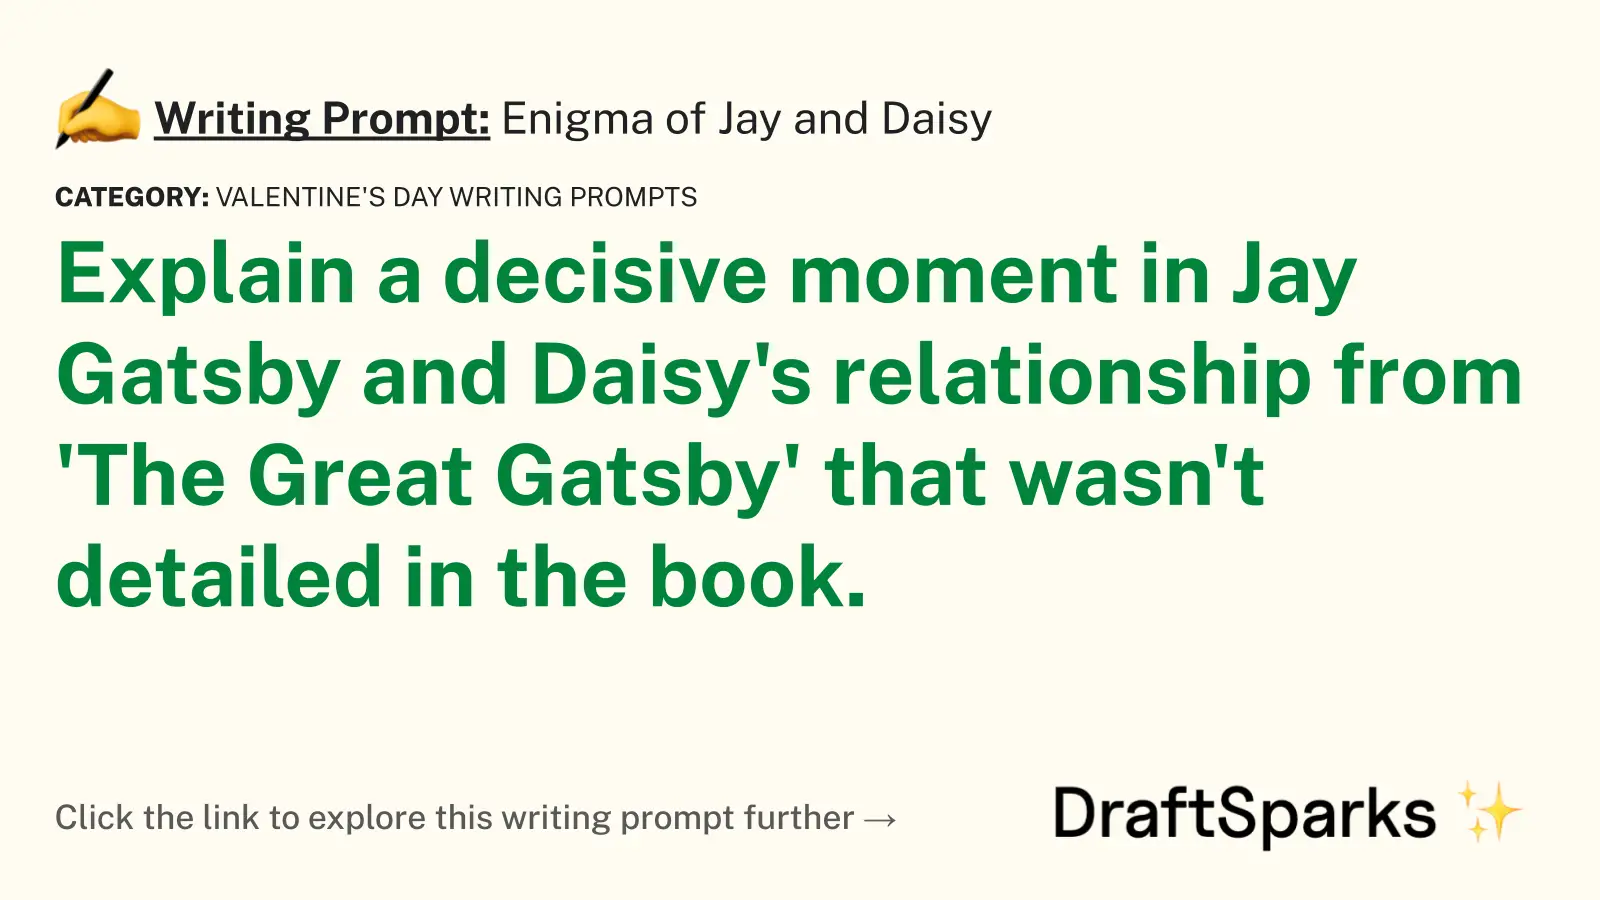 Enigma of Jay and Daisy